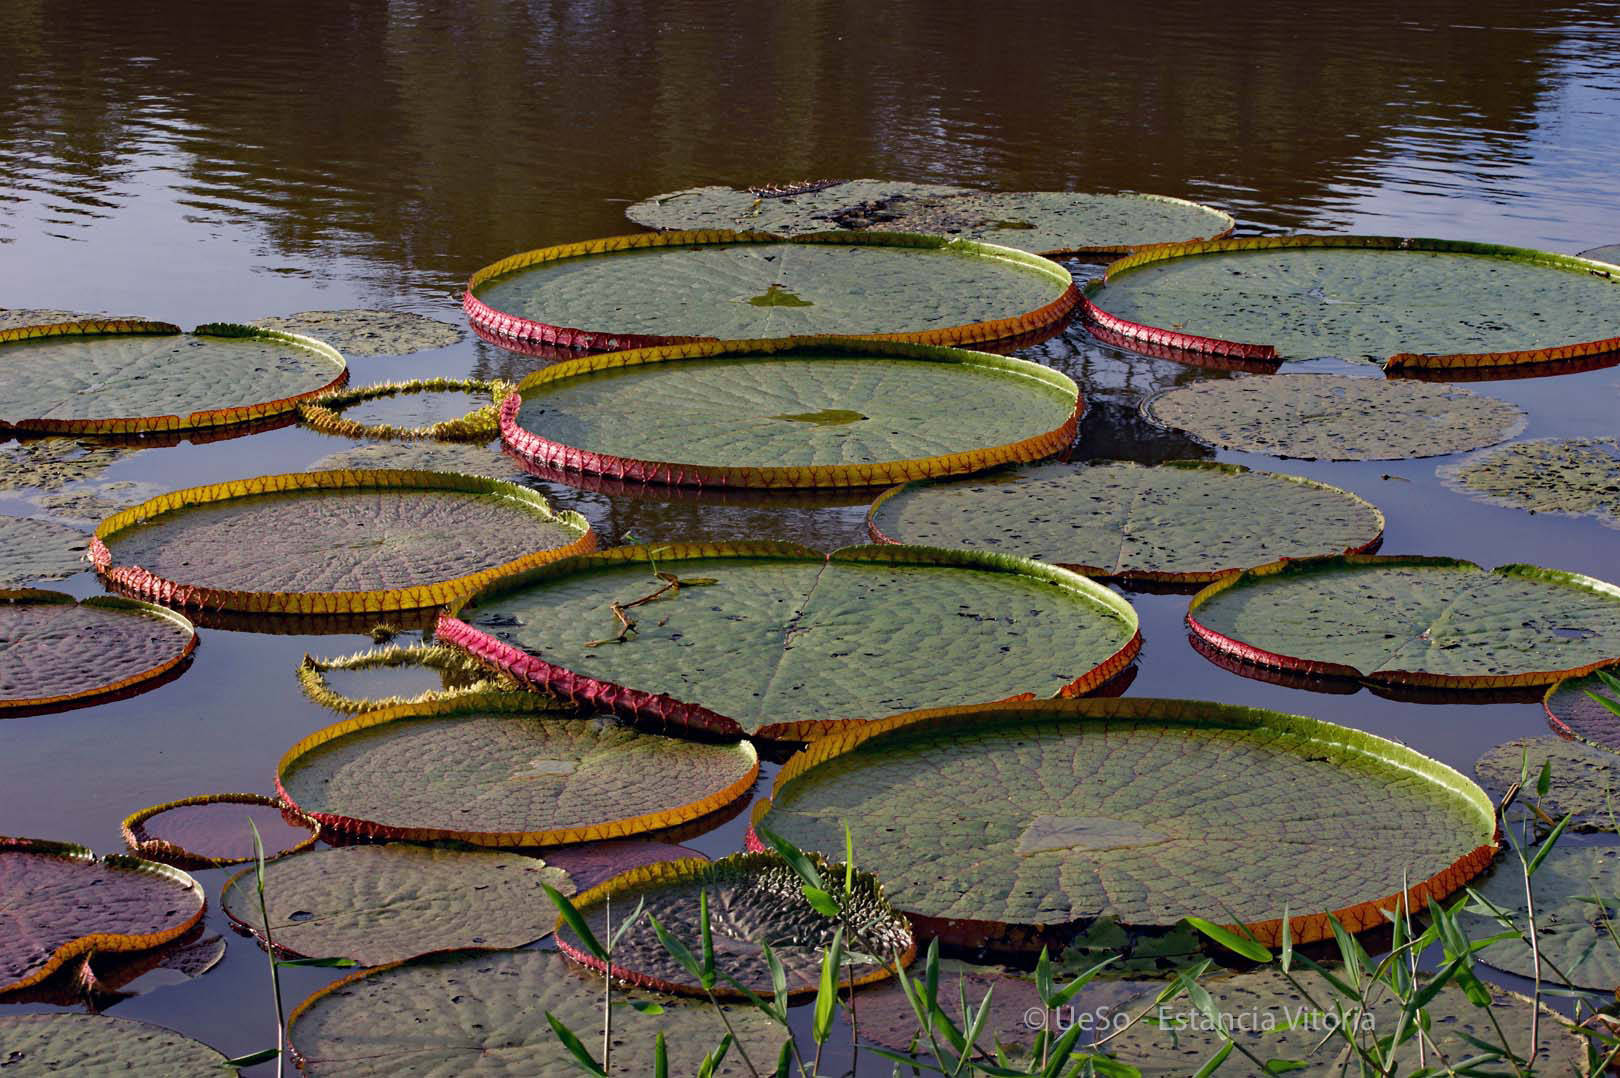 A common sight, the giant Victoria water lily